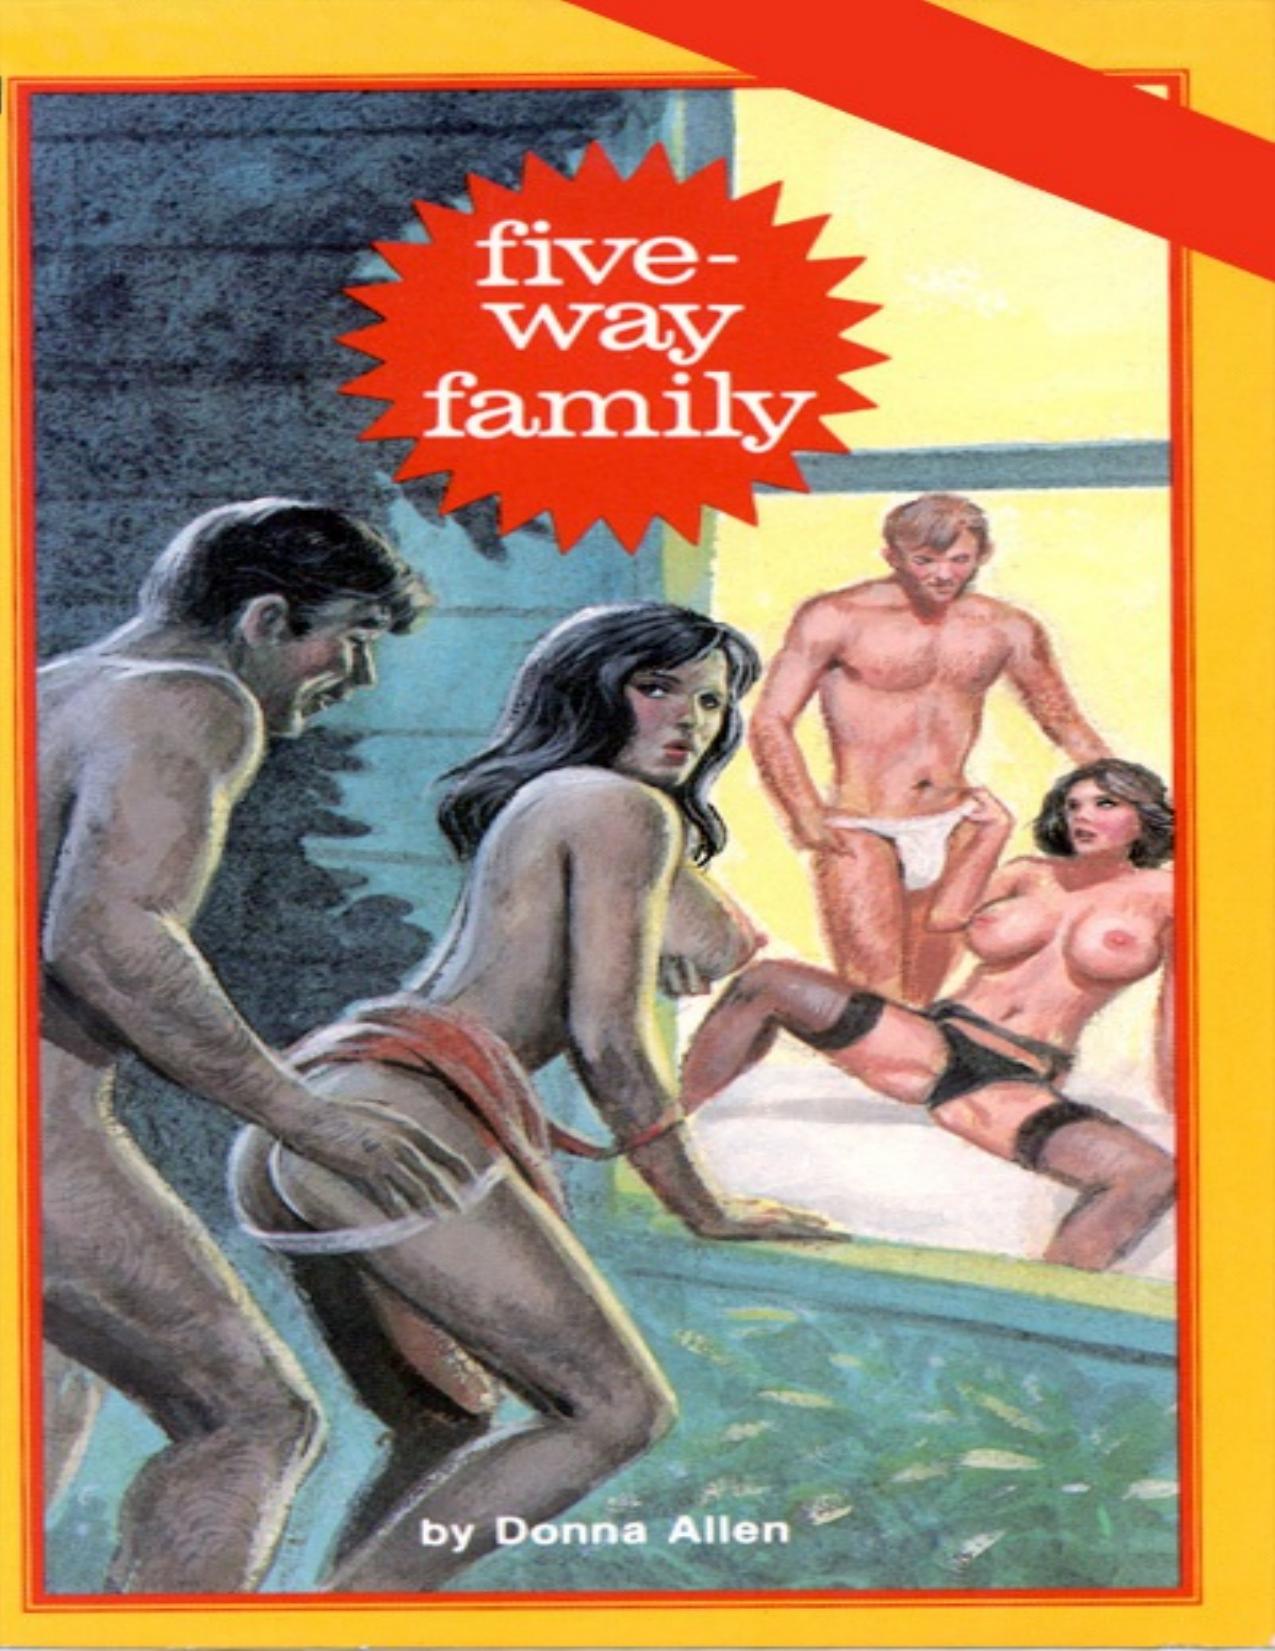 Five-Way Family by Donna Allen